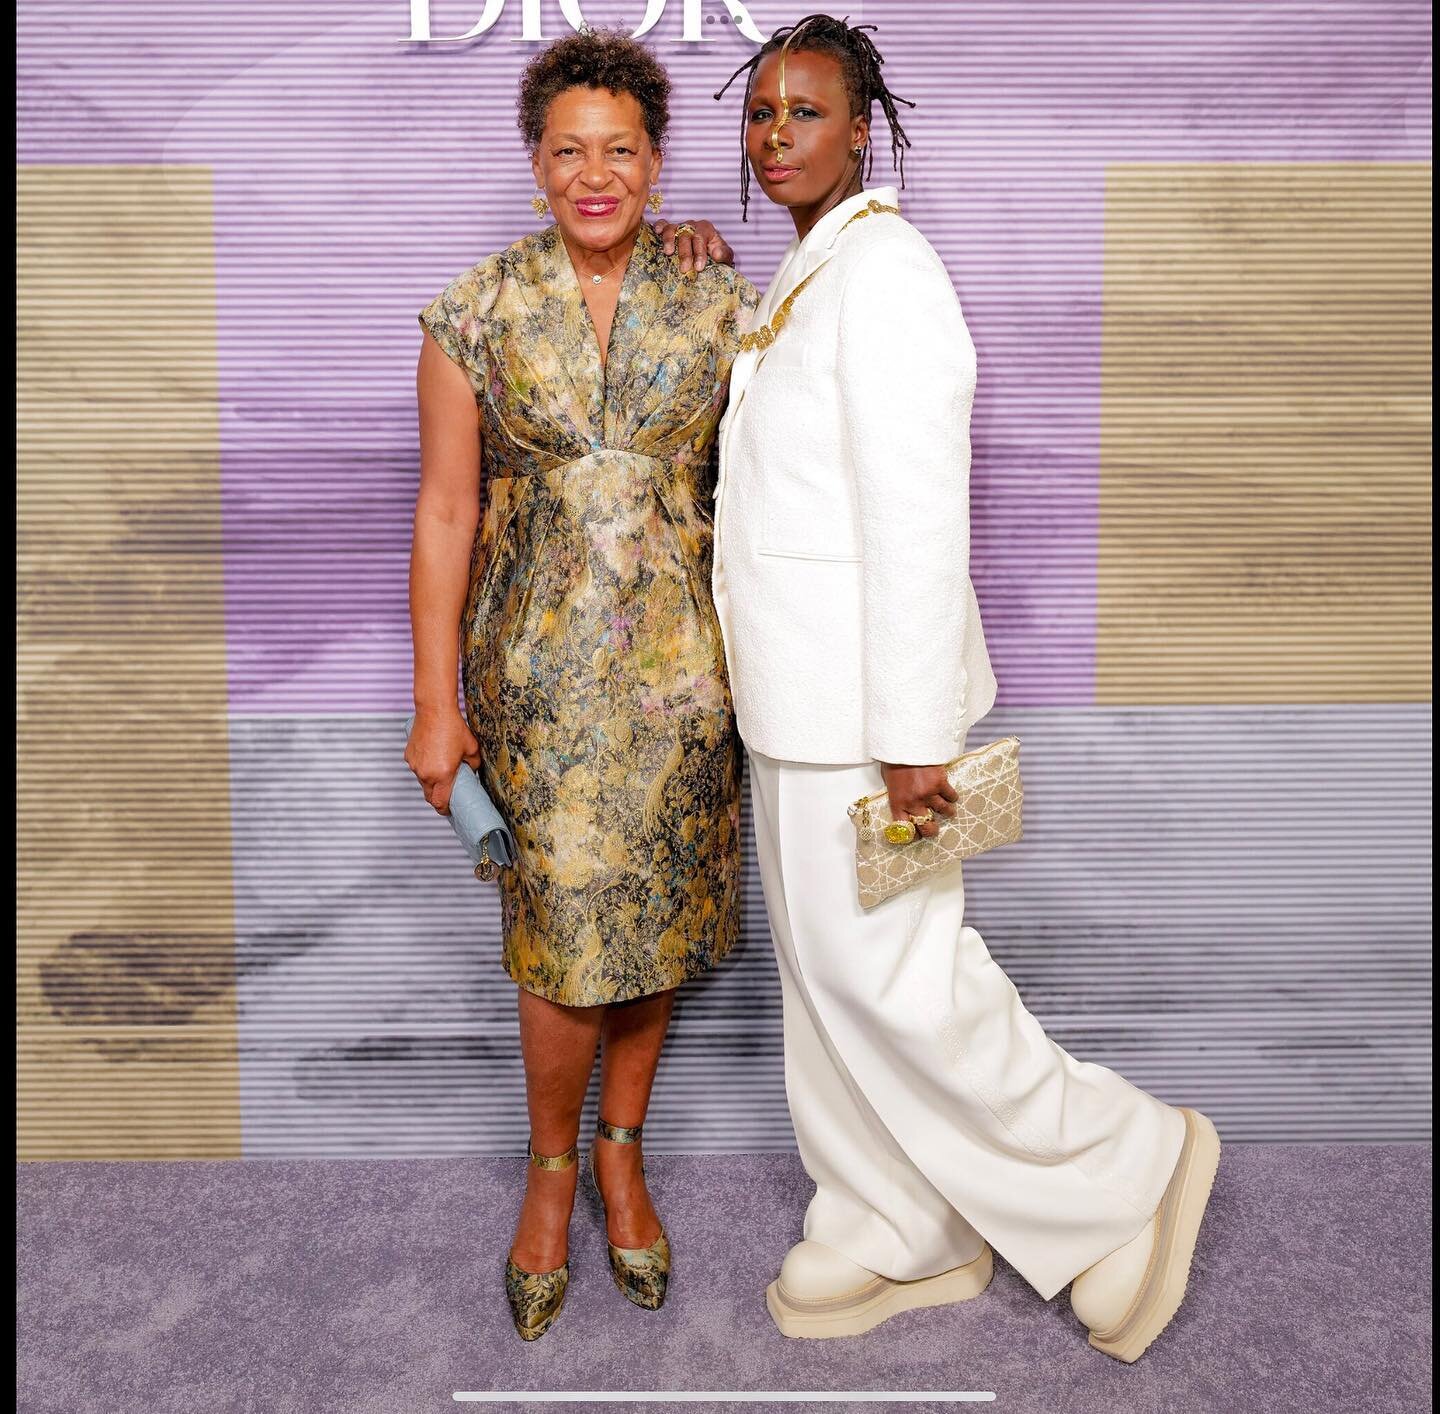 Brooklyn Museum Artists Ball honors the extraordinary artist Carrie Mae Weems and fellow extraordinary artist Mickalene Thomas curated the museum&rsquo;s Beaux-Arts Court&hellip;they own the night impeccably attired in Dior💛